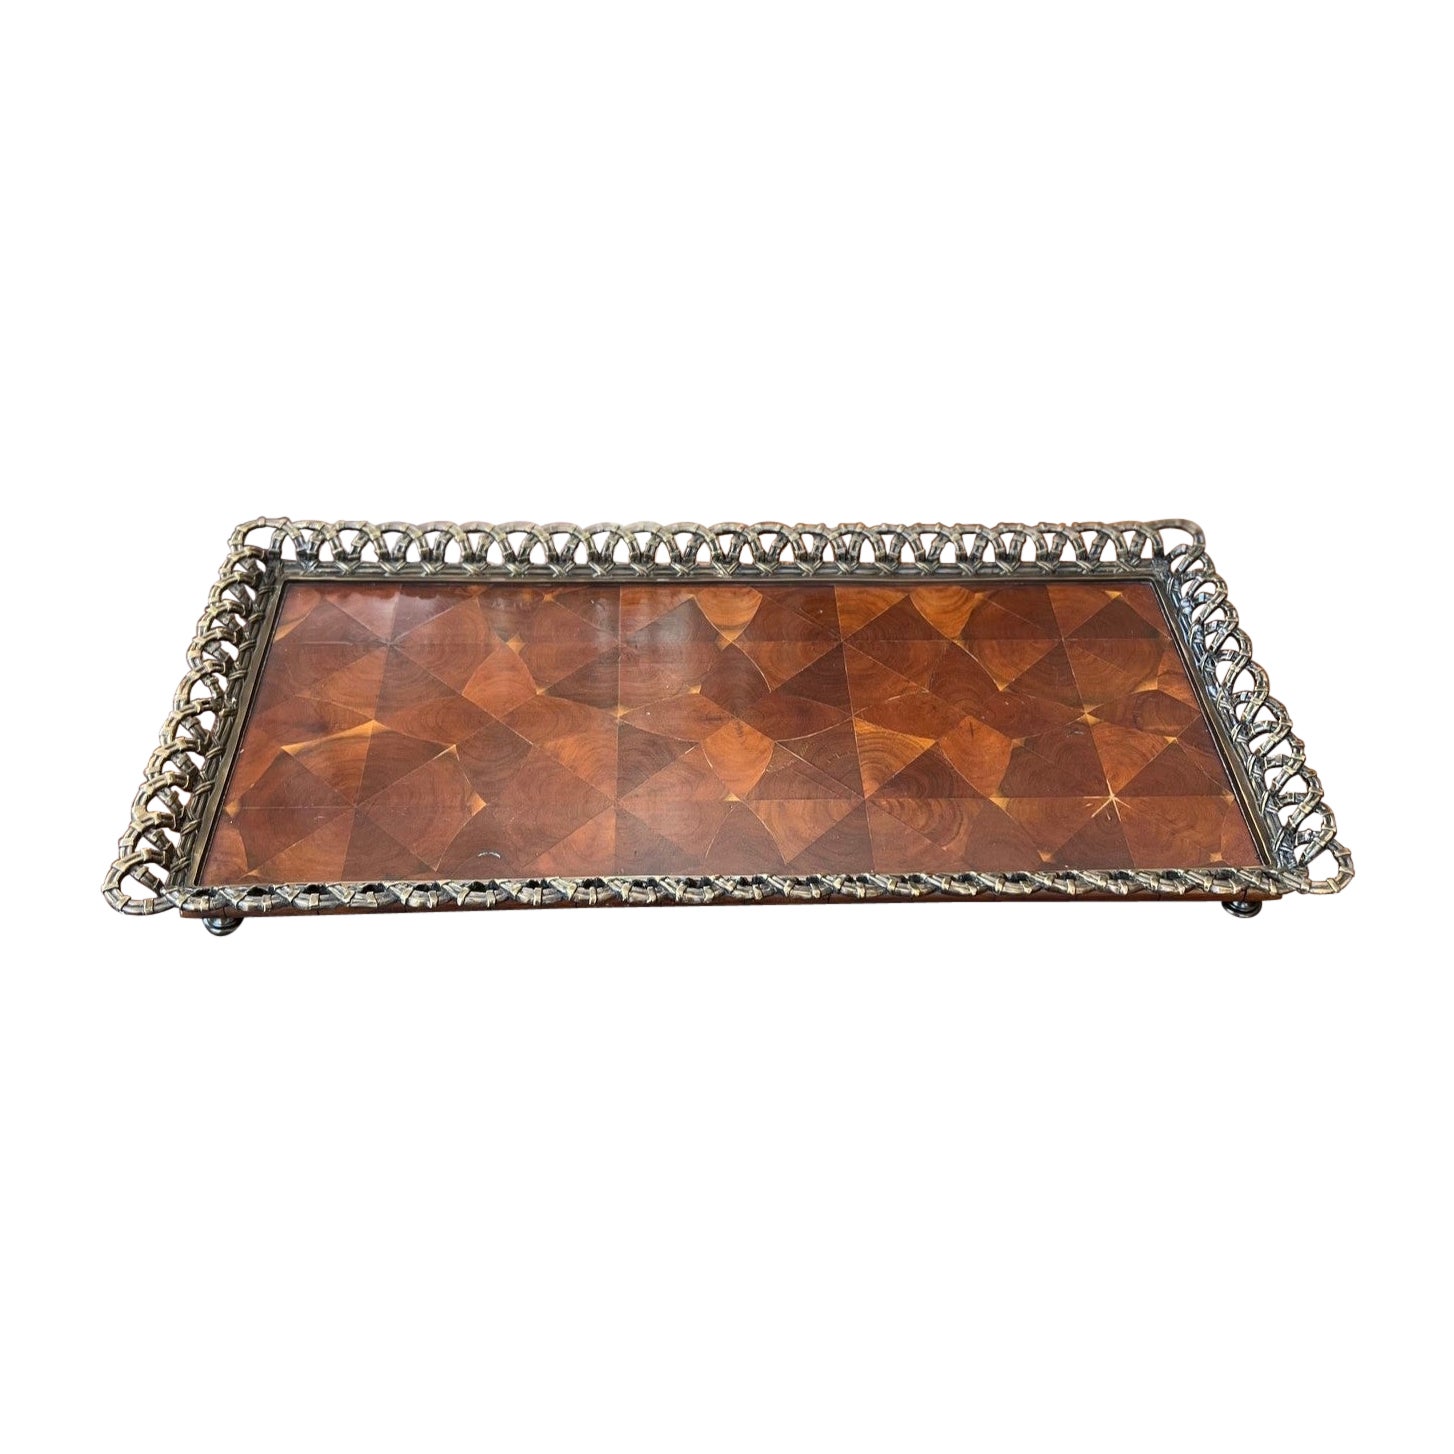 Theodore Alexander Oyster Veneer Tray With Antiqued Brass Gallery and Bun Feet For Sale